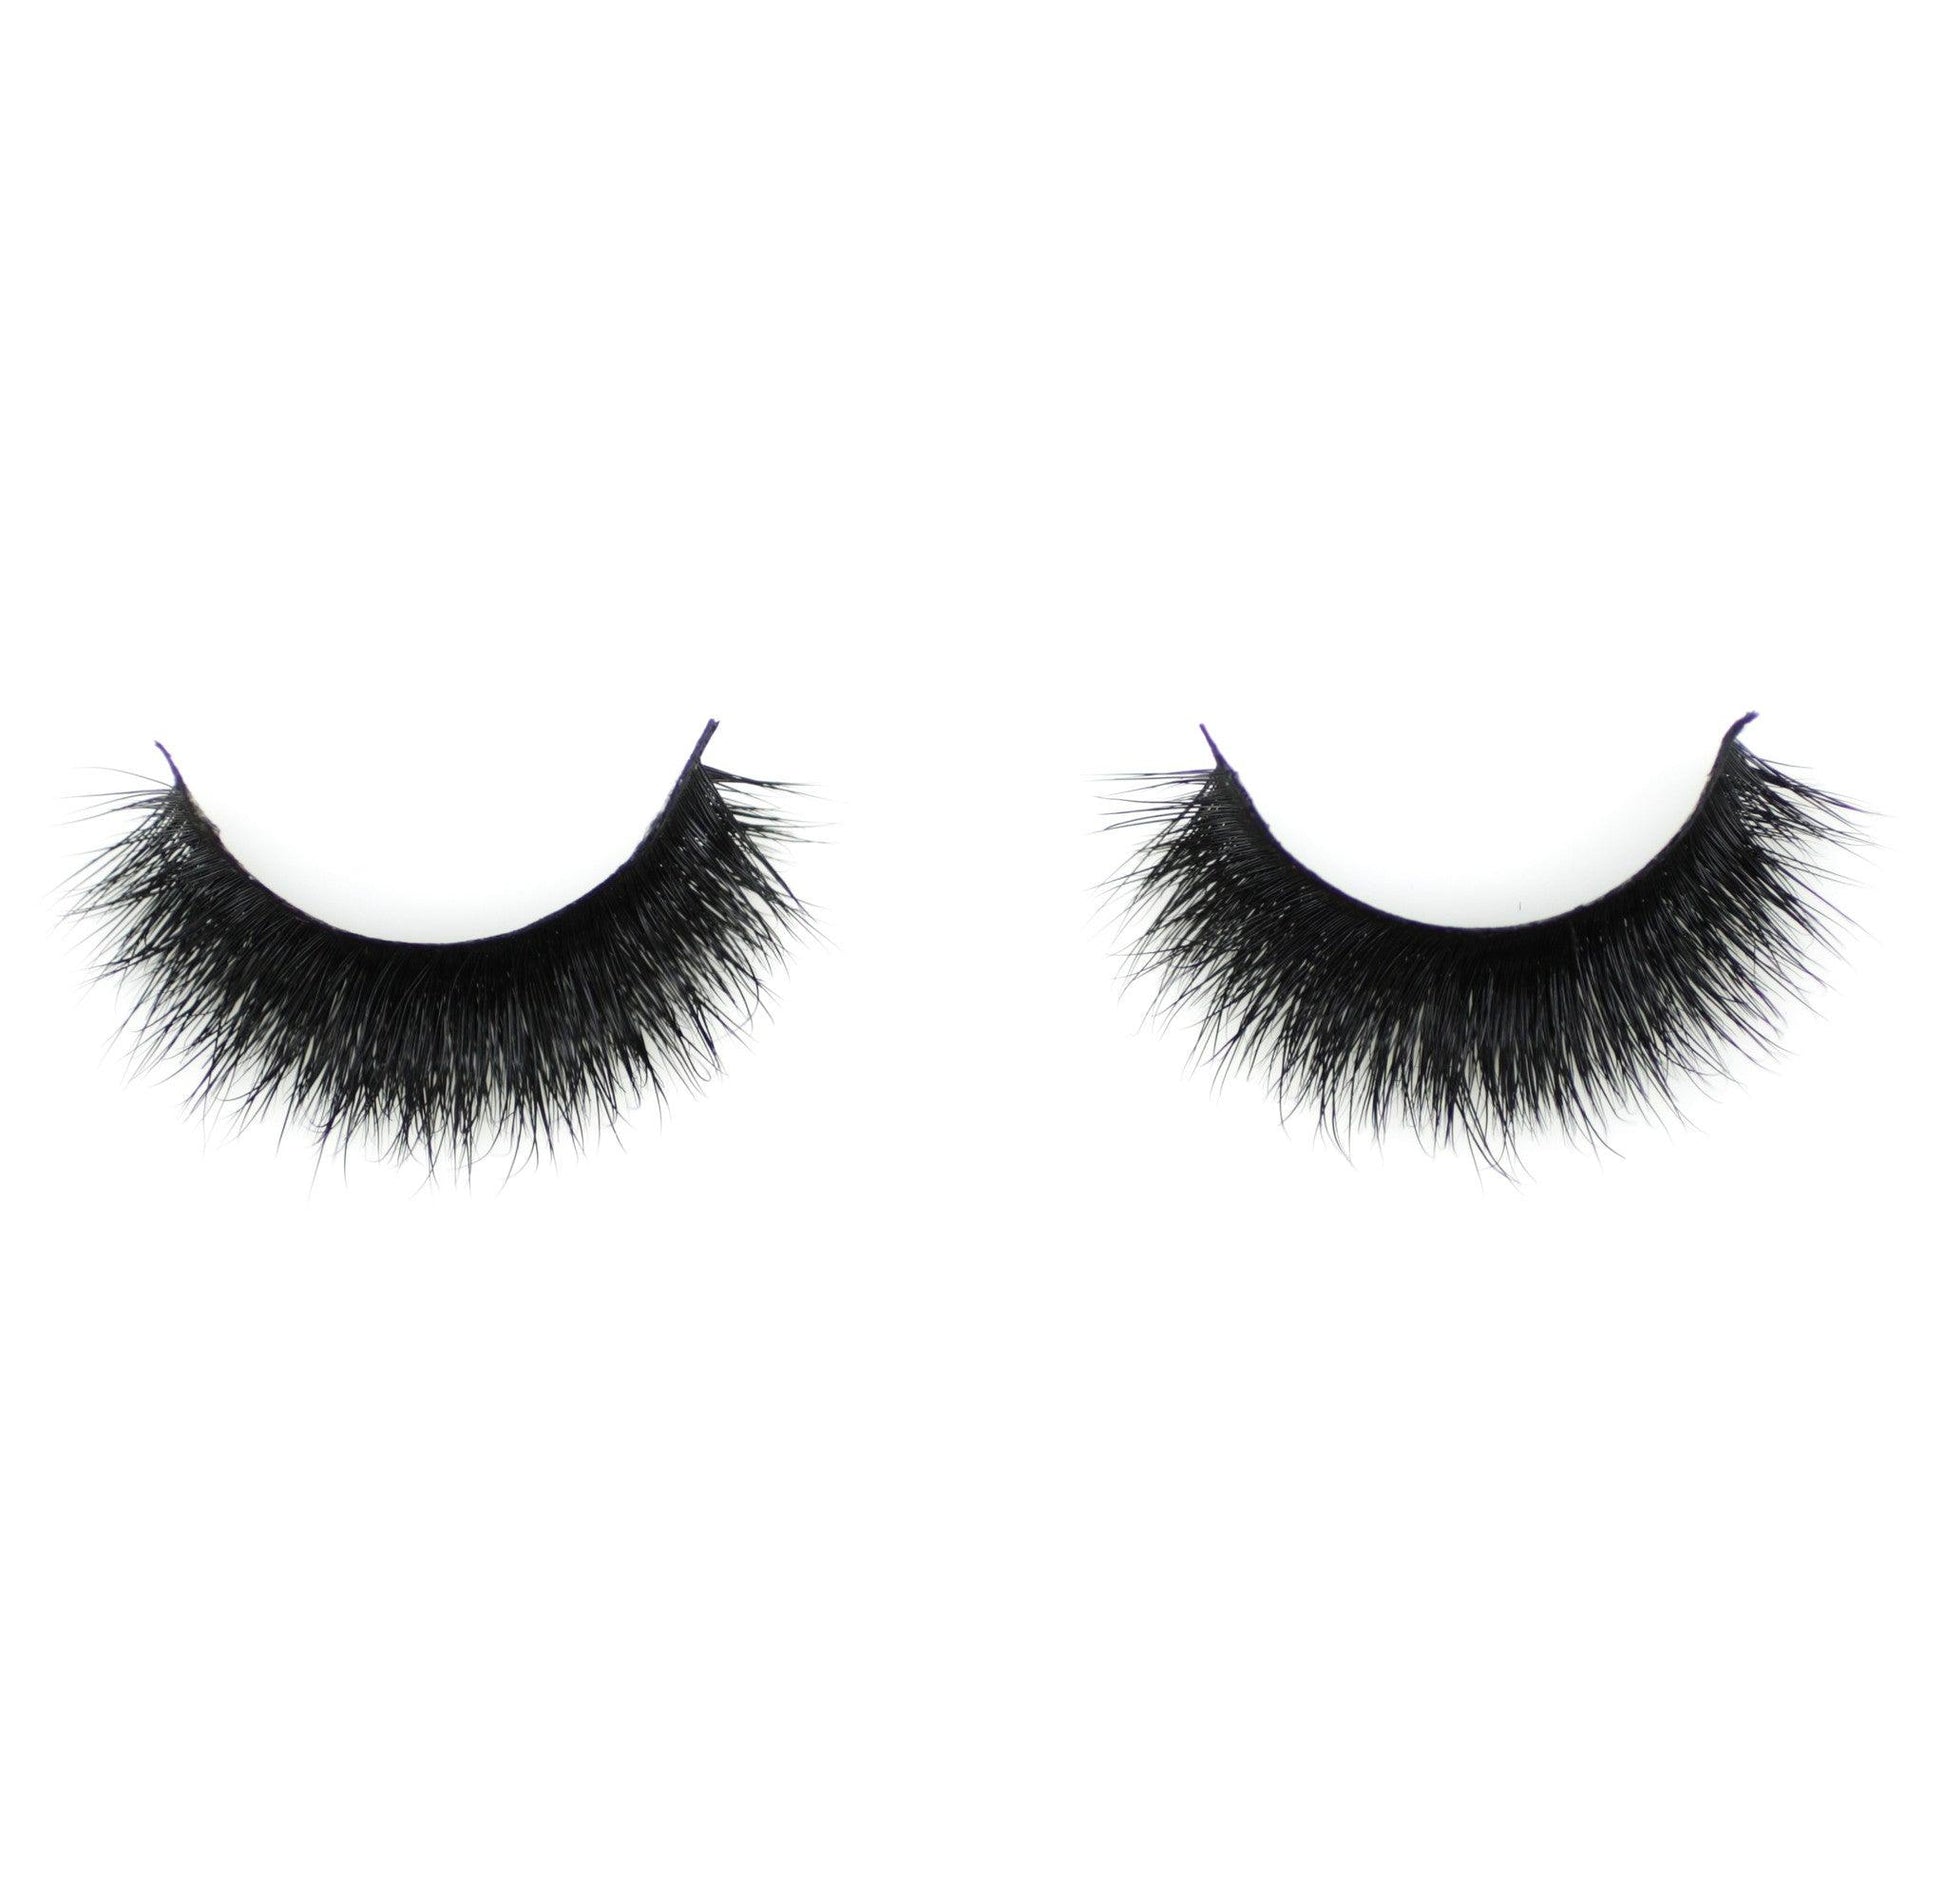 Mink eye lashes (6 photos) - Photography and Web Design - Los Angeles, US based Shopify Experts Revo Designs